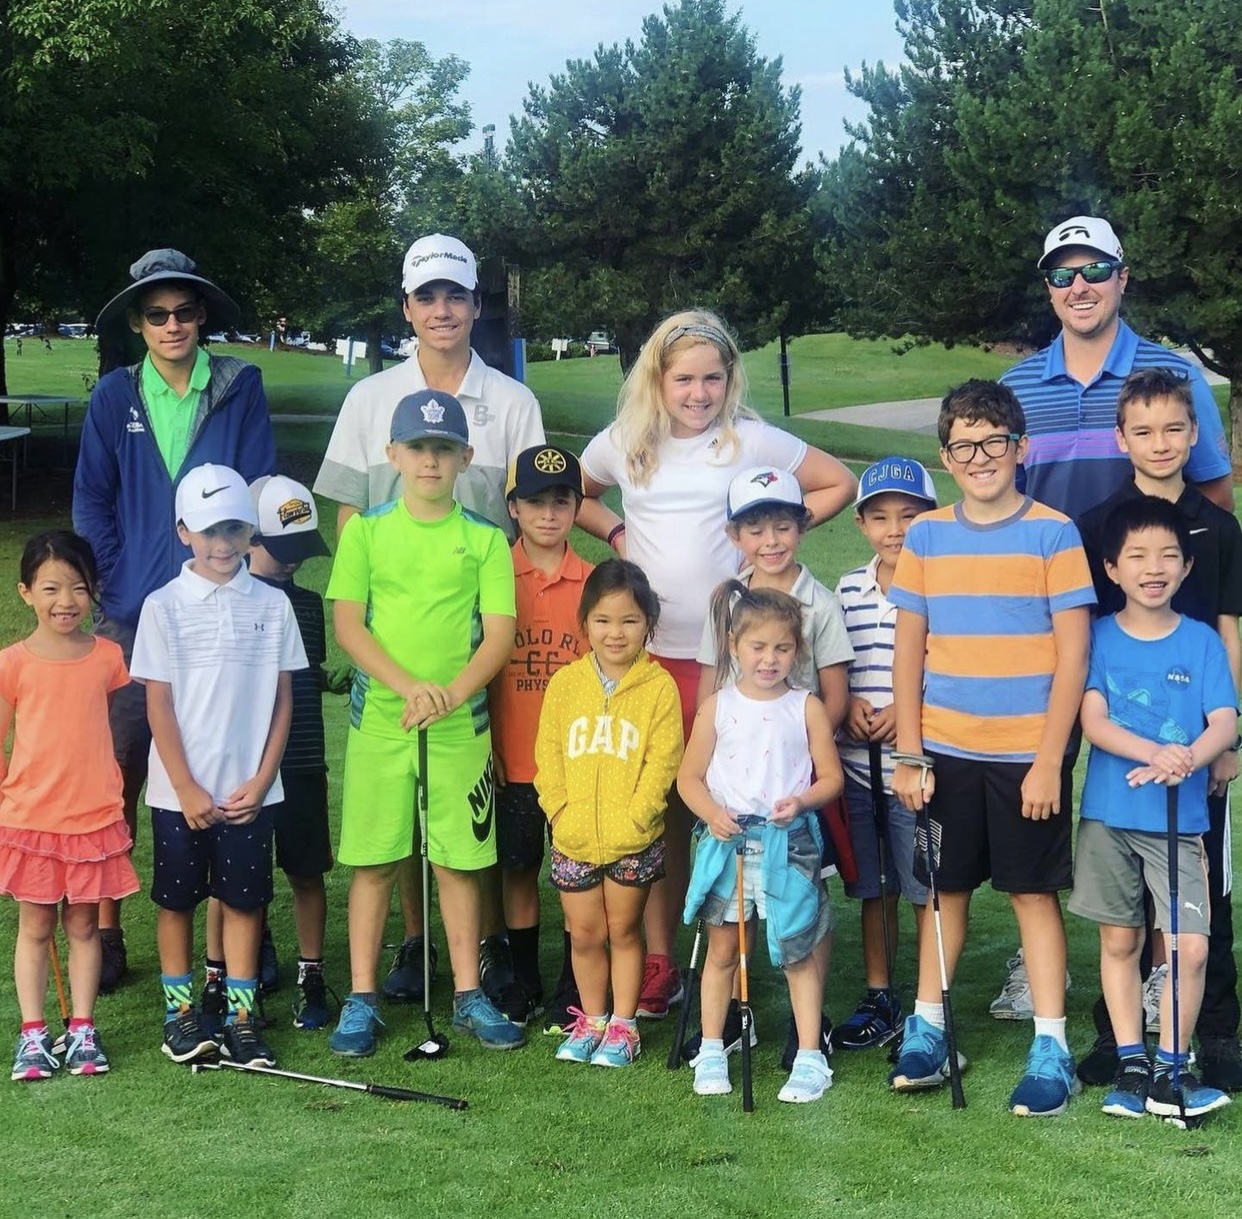 Group at Kids golf camp in Mississauga.